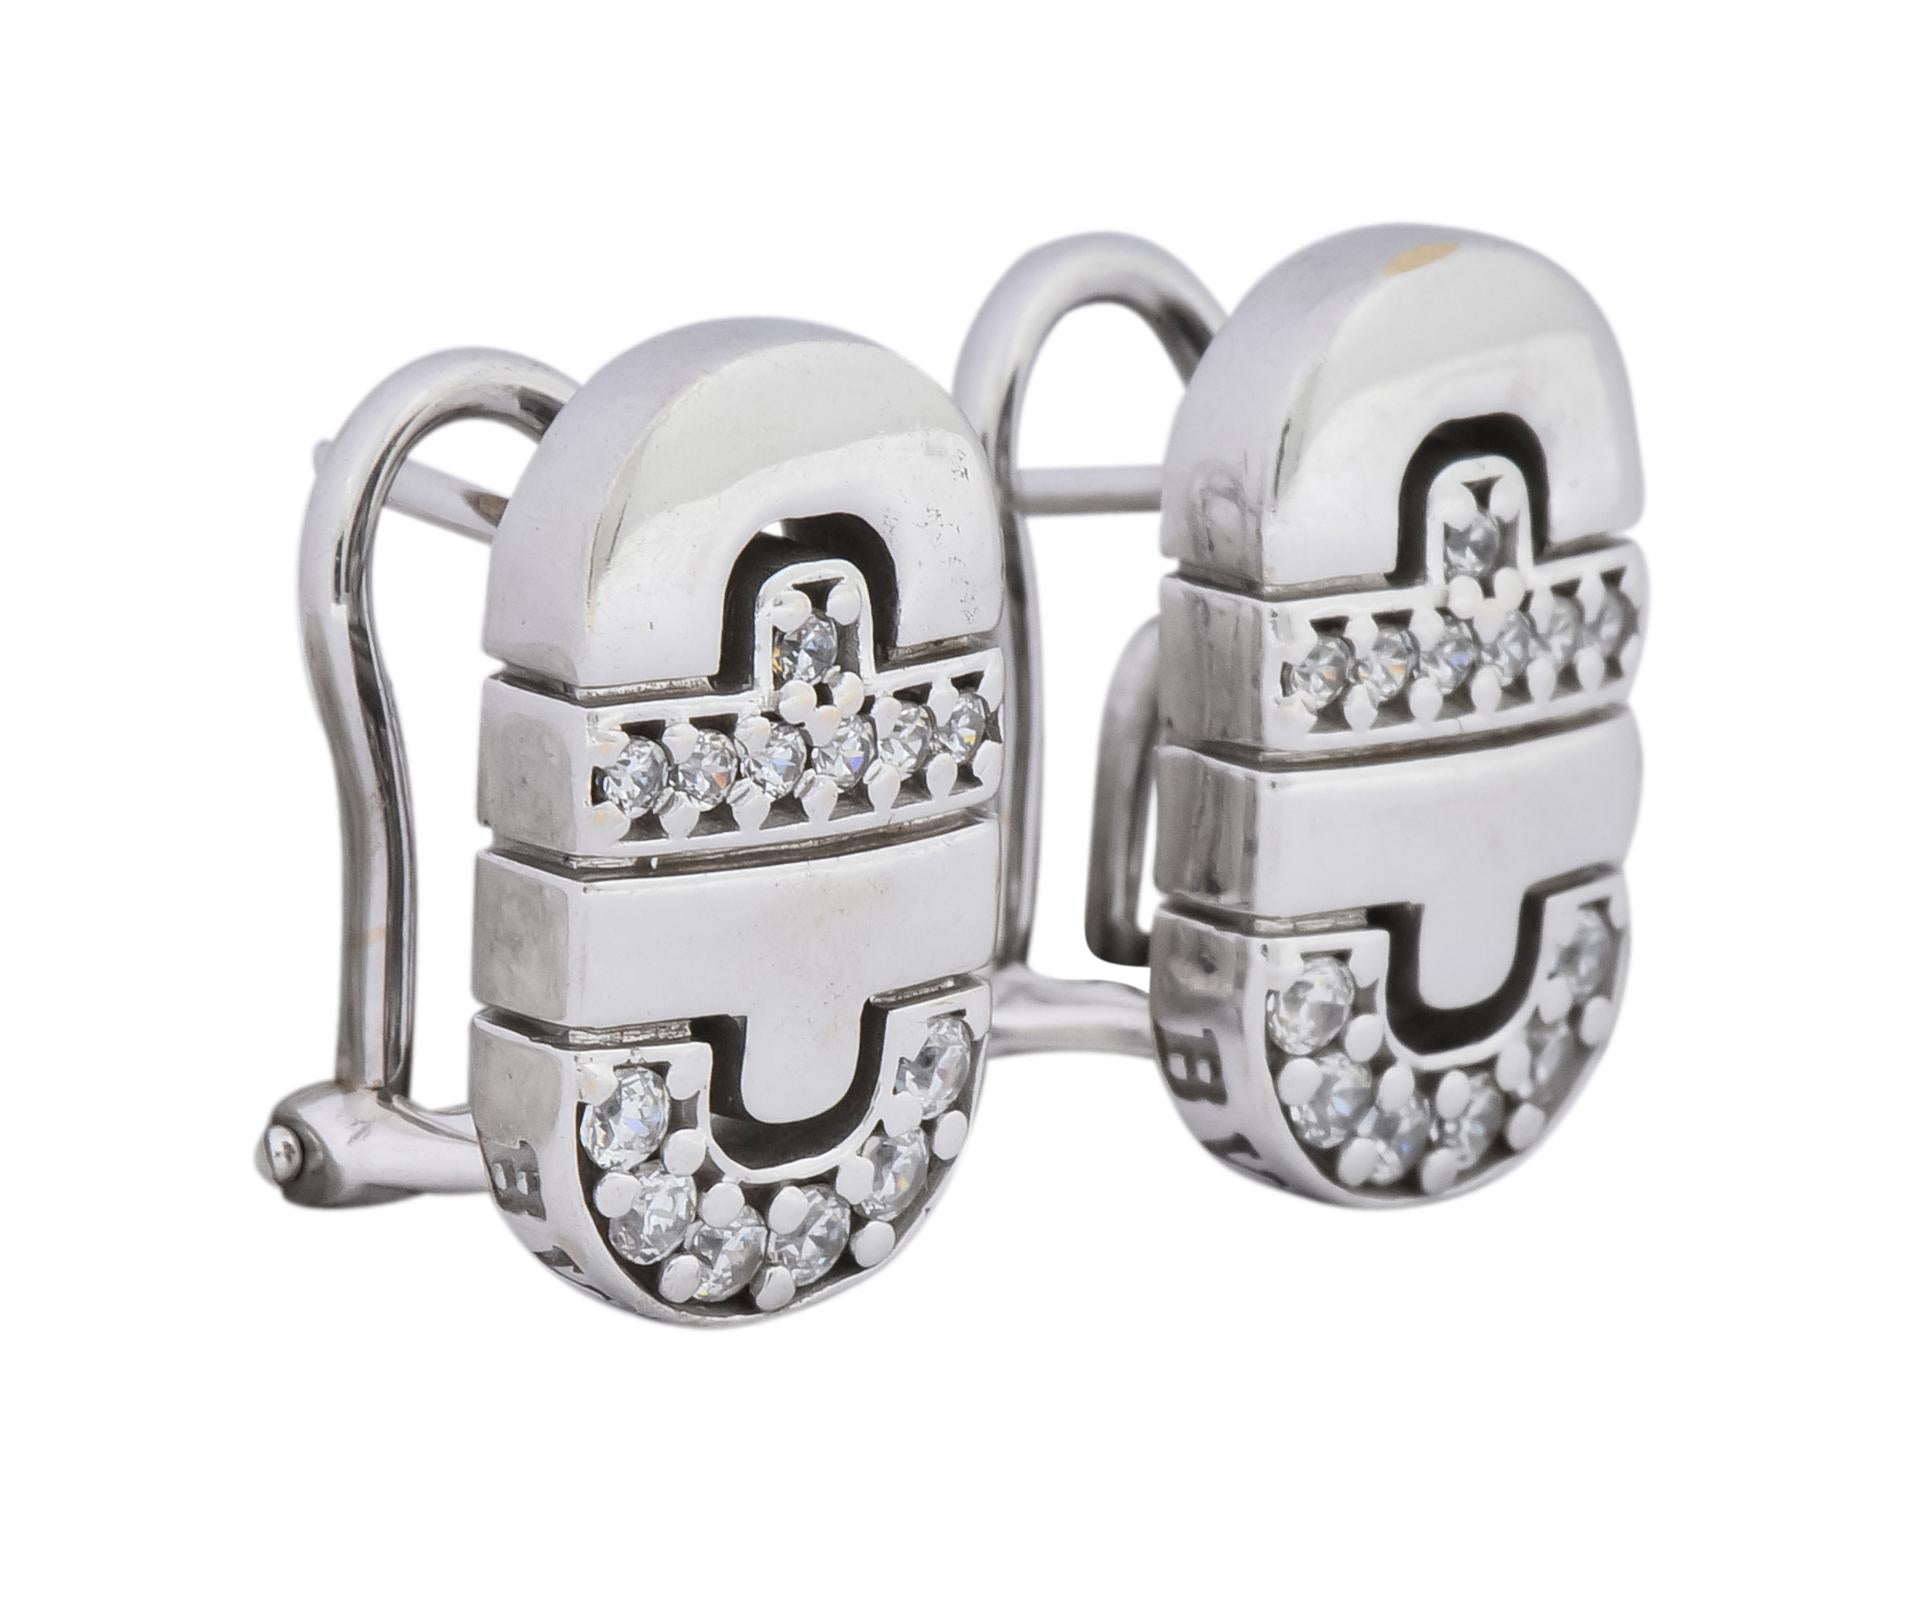 Earrings designed as rounded rectangular shapes featuring half circle and bar Parentesi motif
Accented by, bead set, round brilliant cut diamonds weighing approximately 0.25 carat total, G/H color and VS clarity

Completed by hinged omega backs and